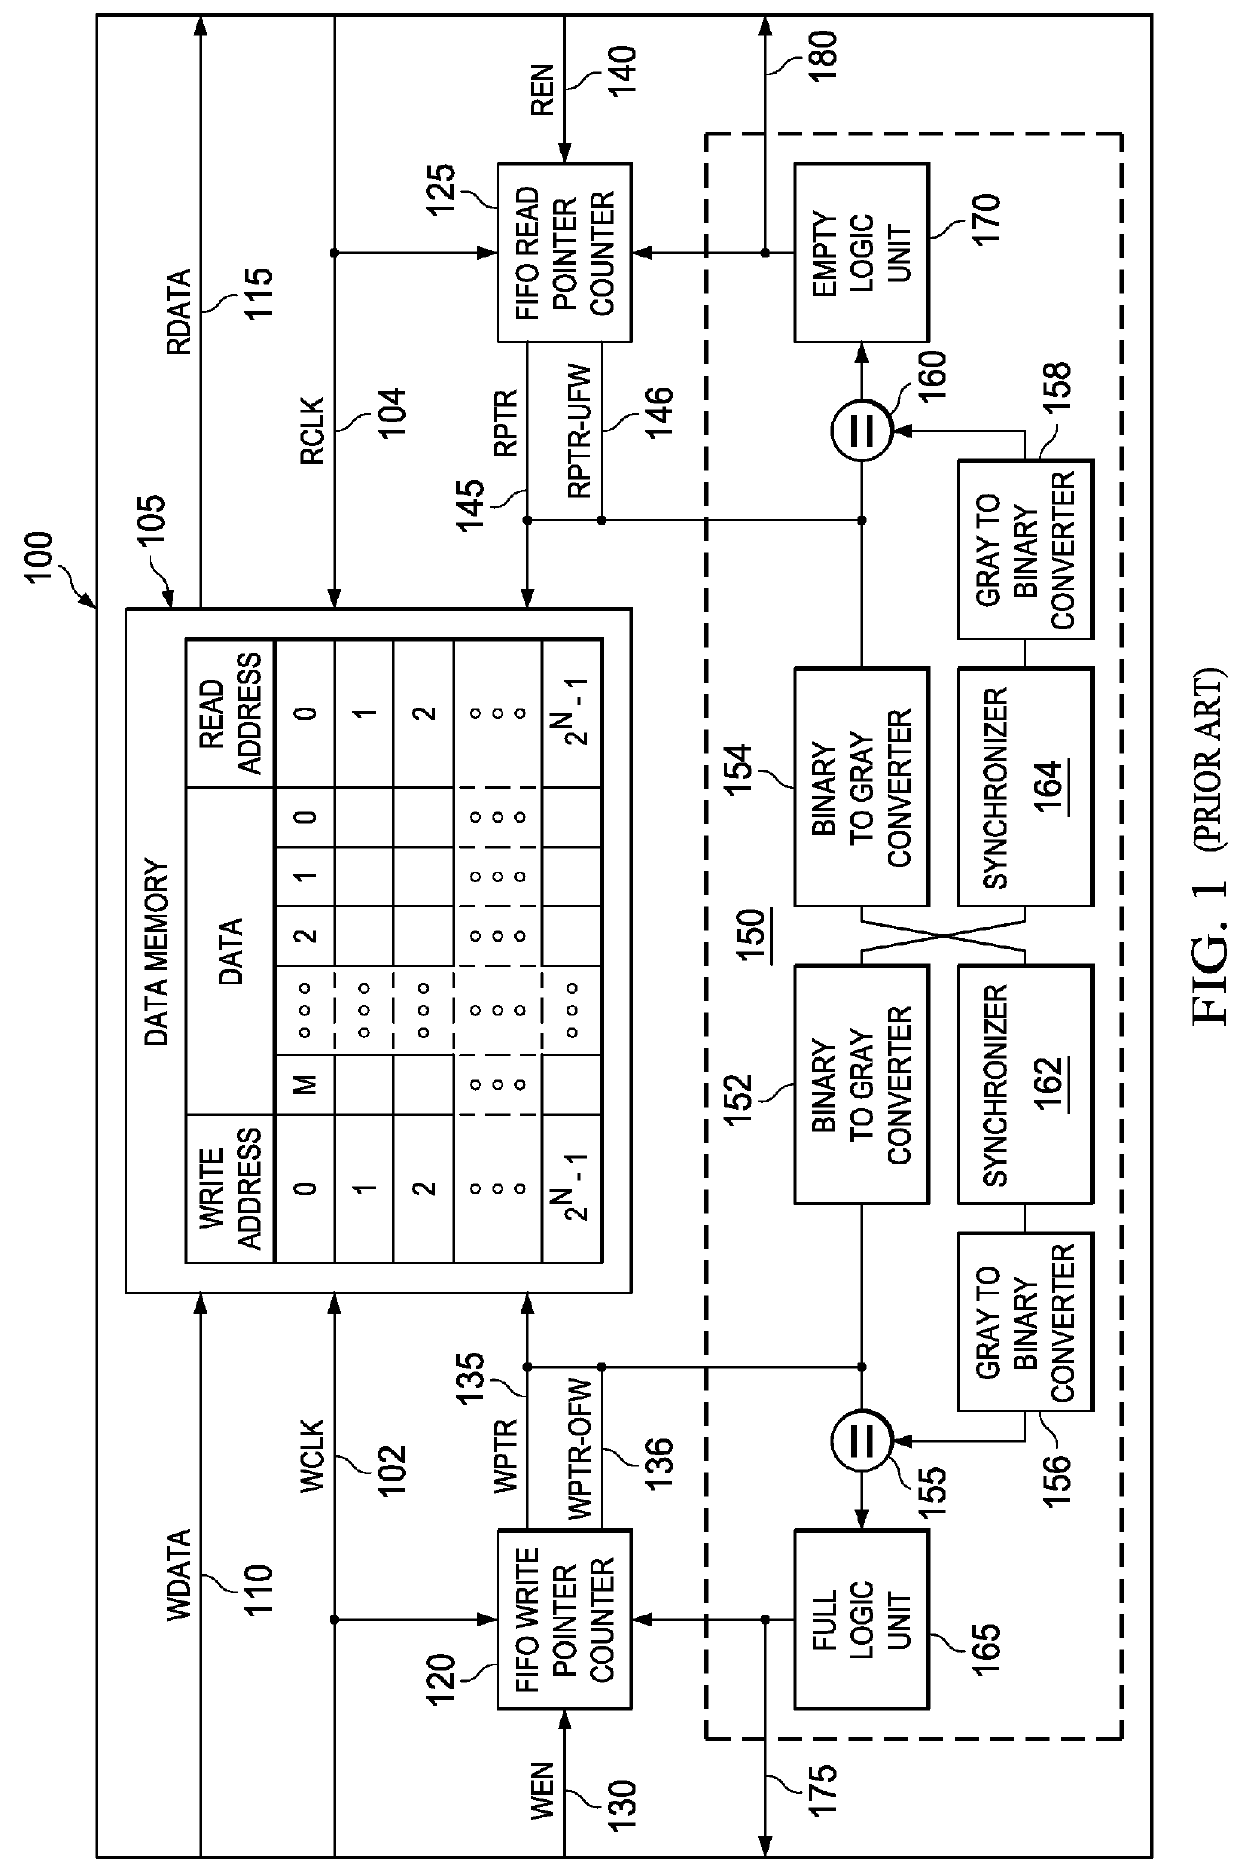 Method and apparatus for asynchronous FIFO circuit